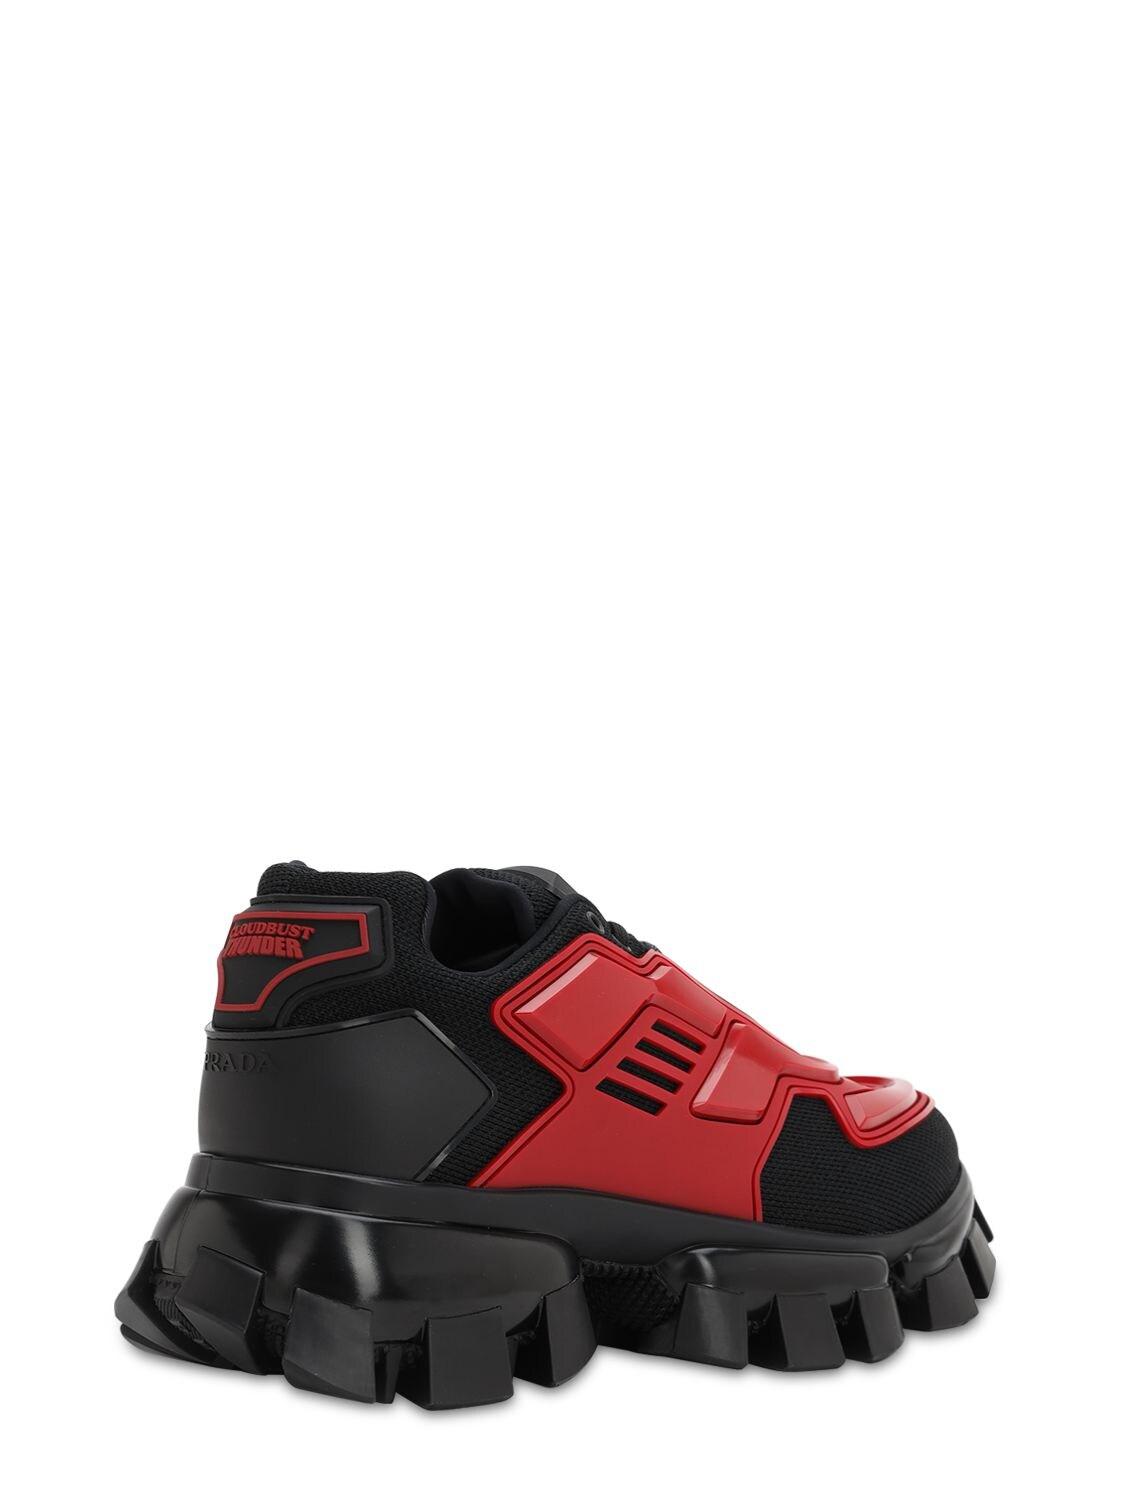 Prada Rubber Cloudbust Thunder Sneakers in Black/Red (Red) for Men ...